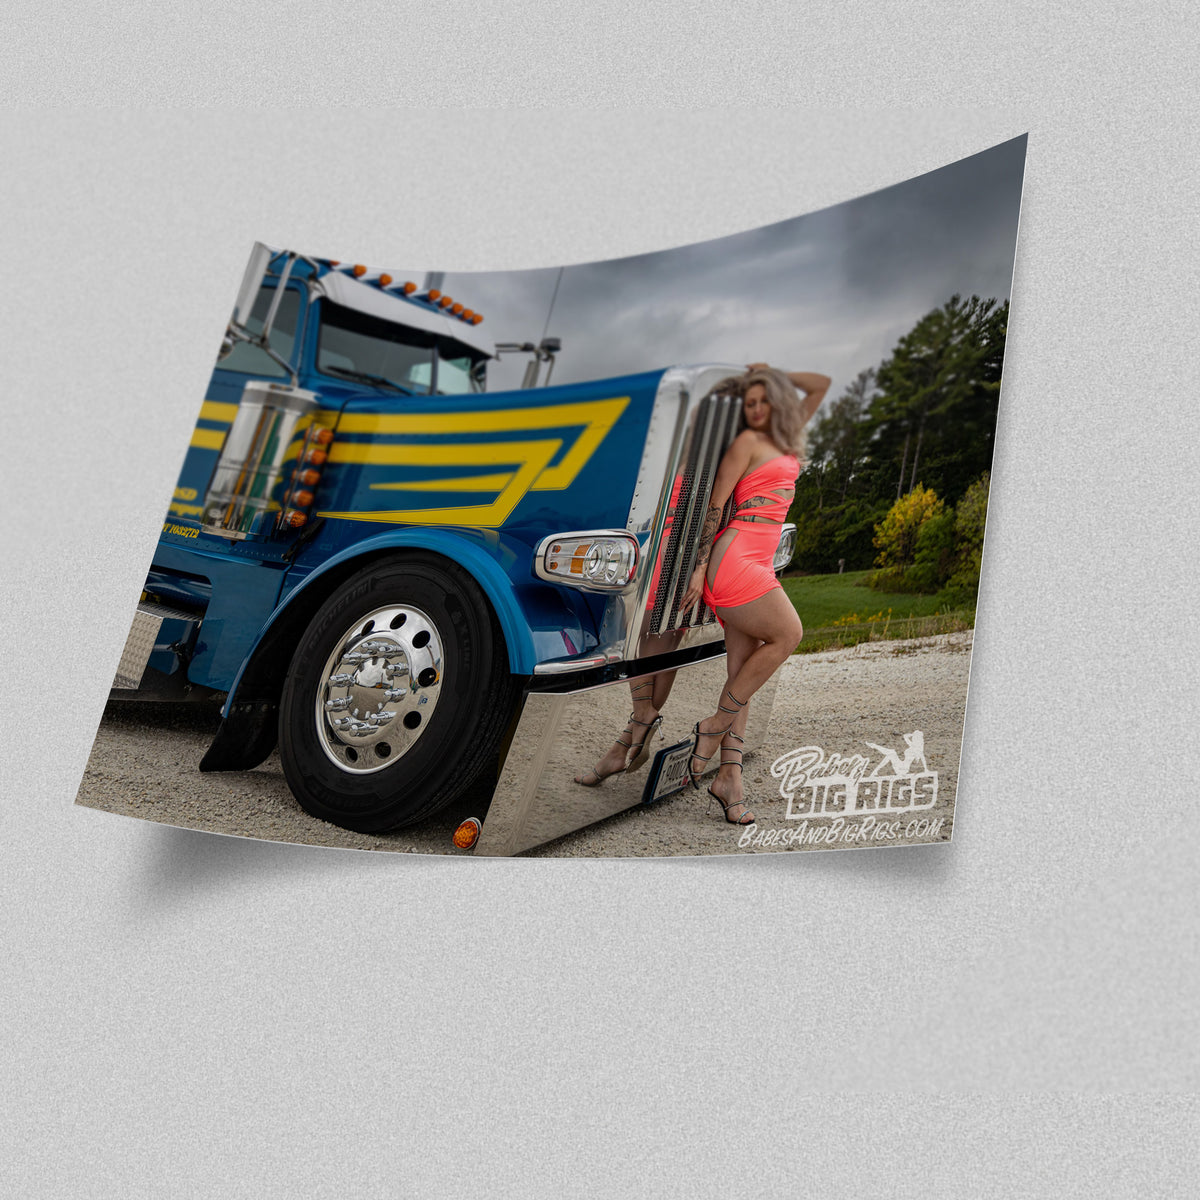 Babes and Big Rigs Poster Prints